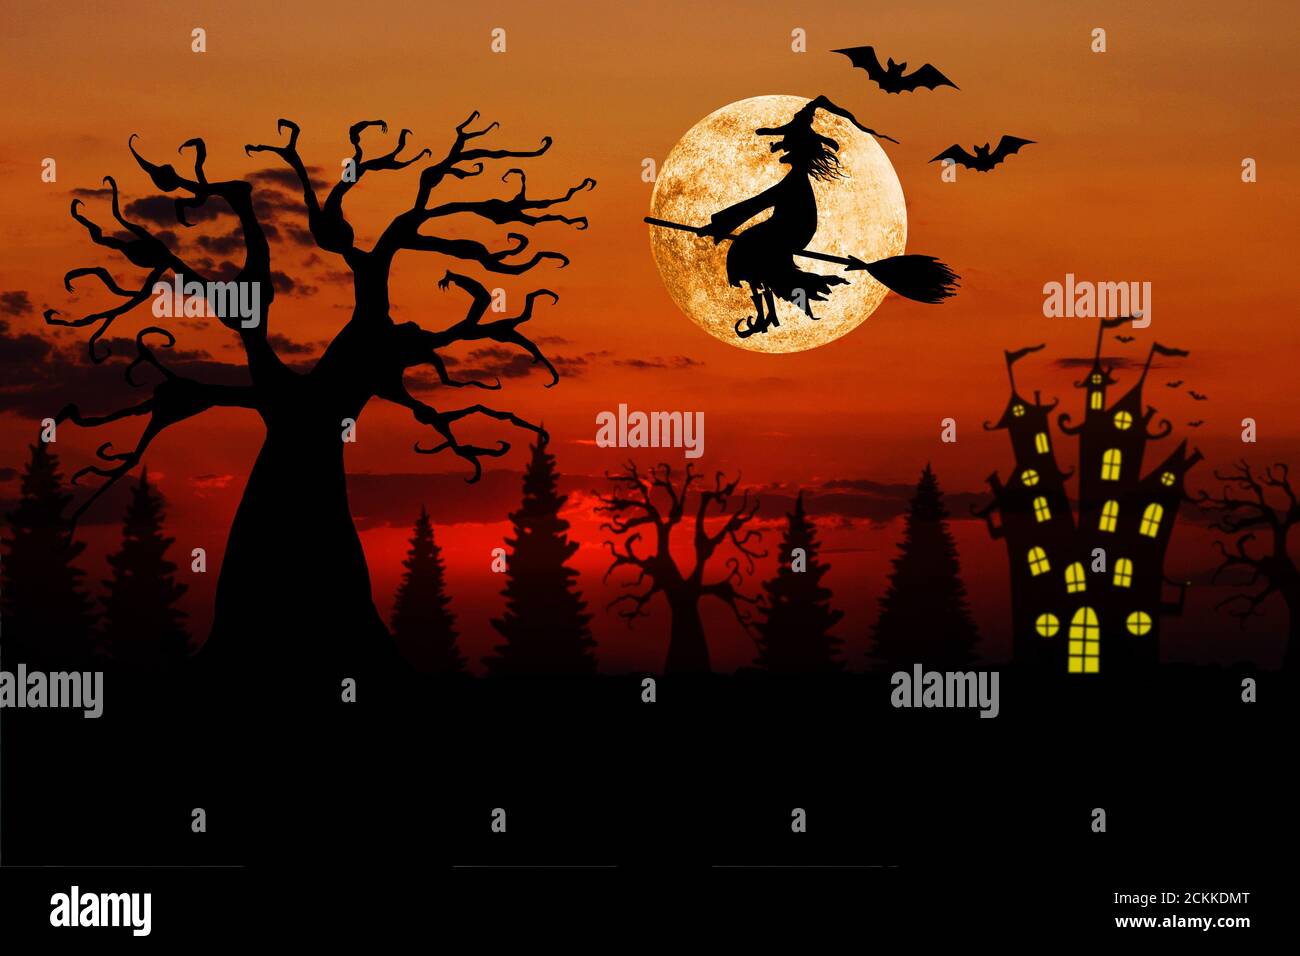 Halloween bloody red sunset horizontal background with full moon, silhouettes of terrible dead trees, castle, bats, smiling wicked witch flying on bro Stock Photo